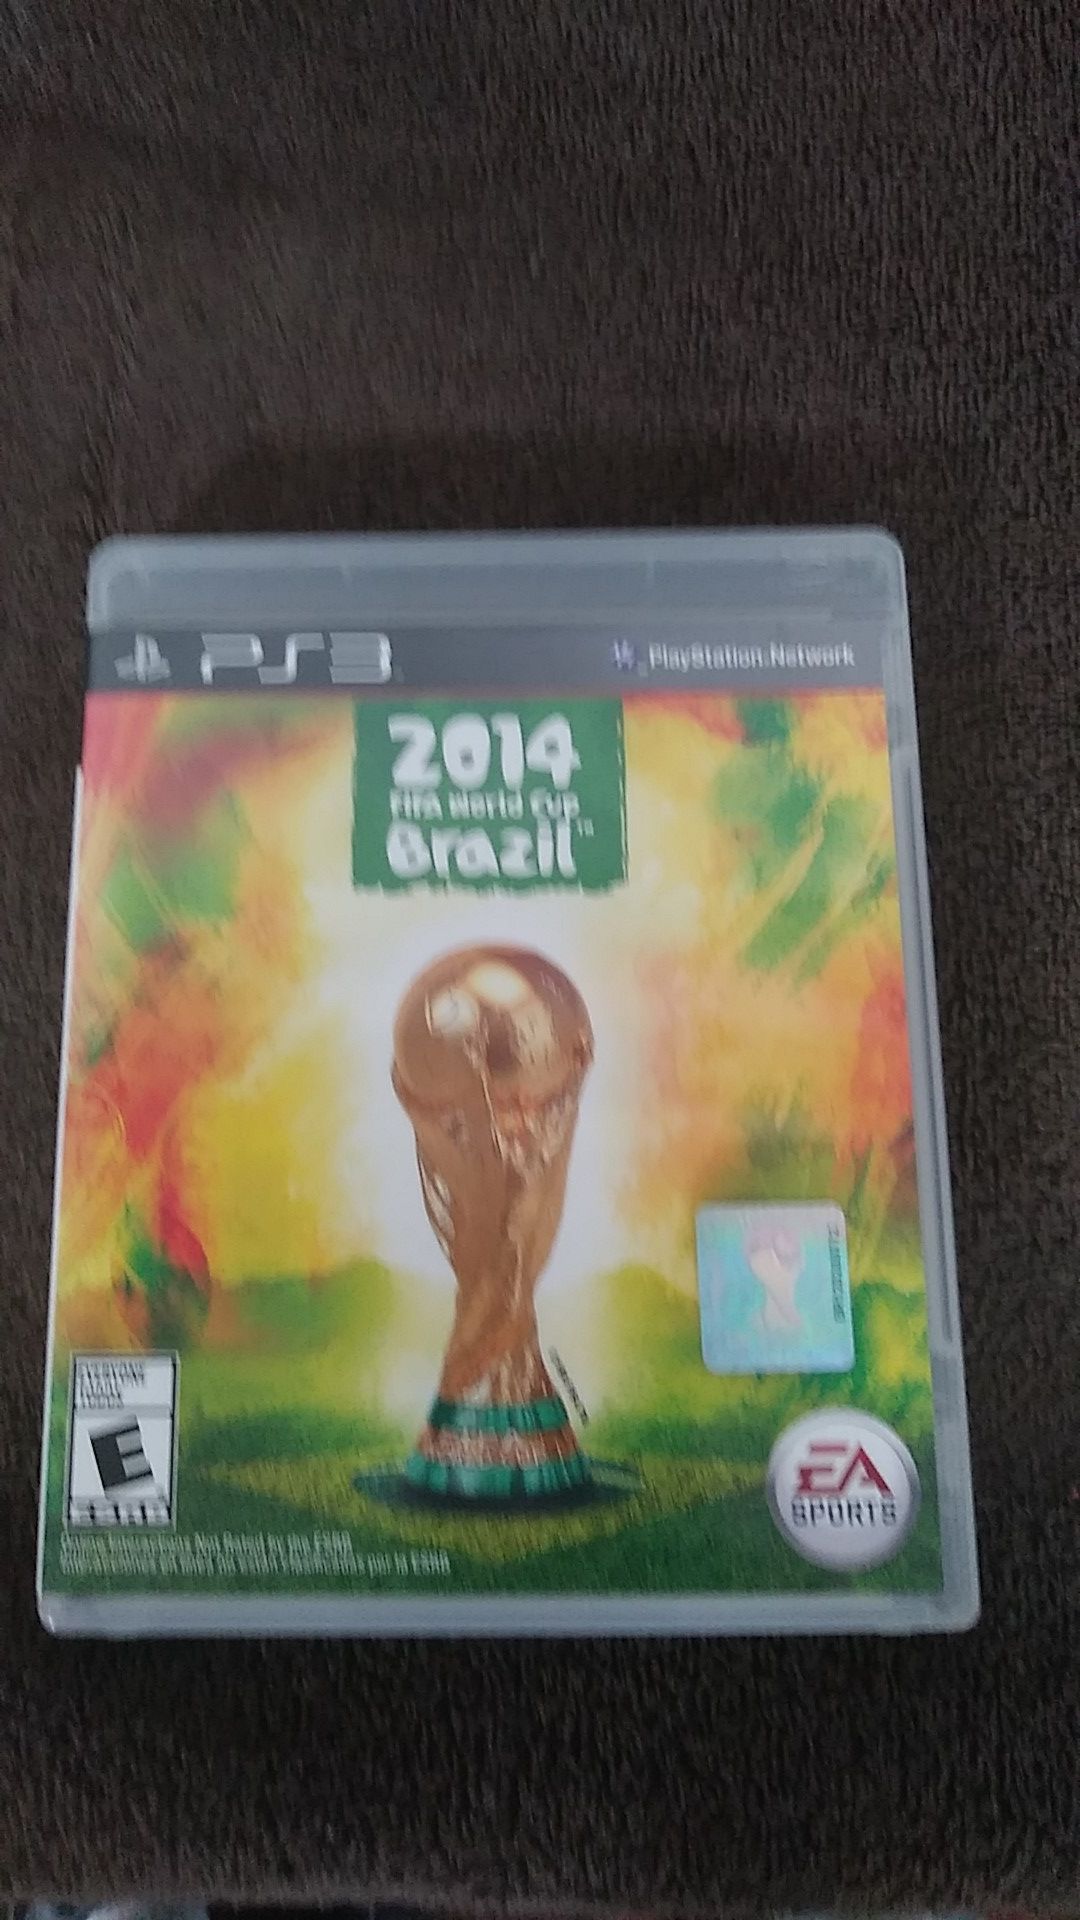 10$ Ps3 2014 fifa world cup brazil